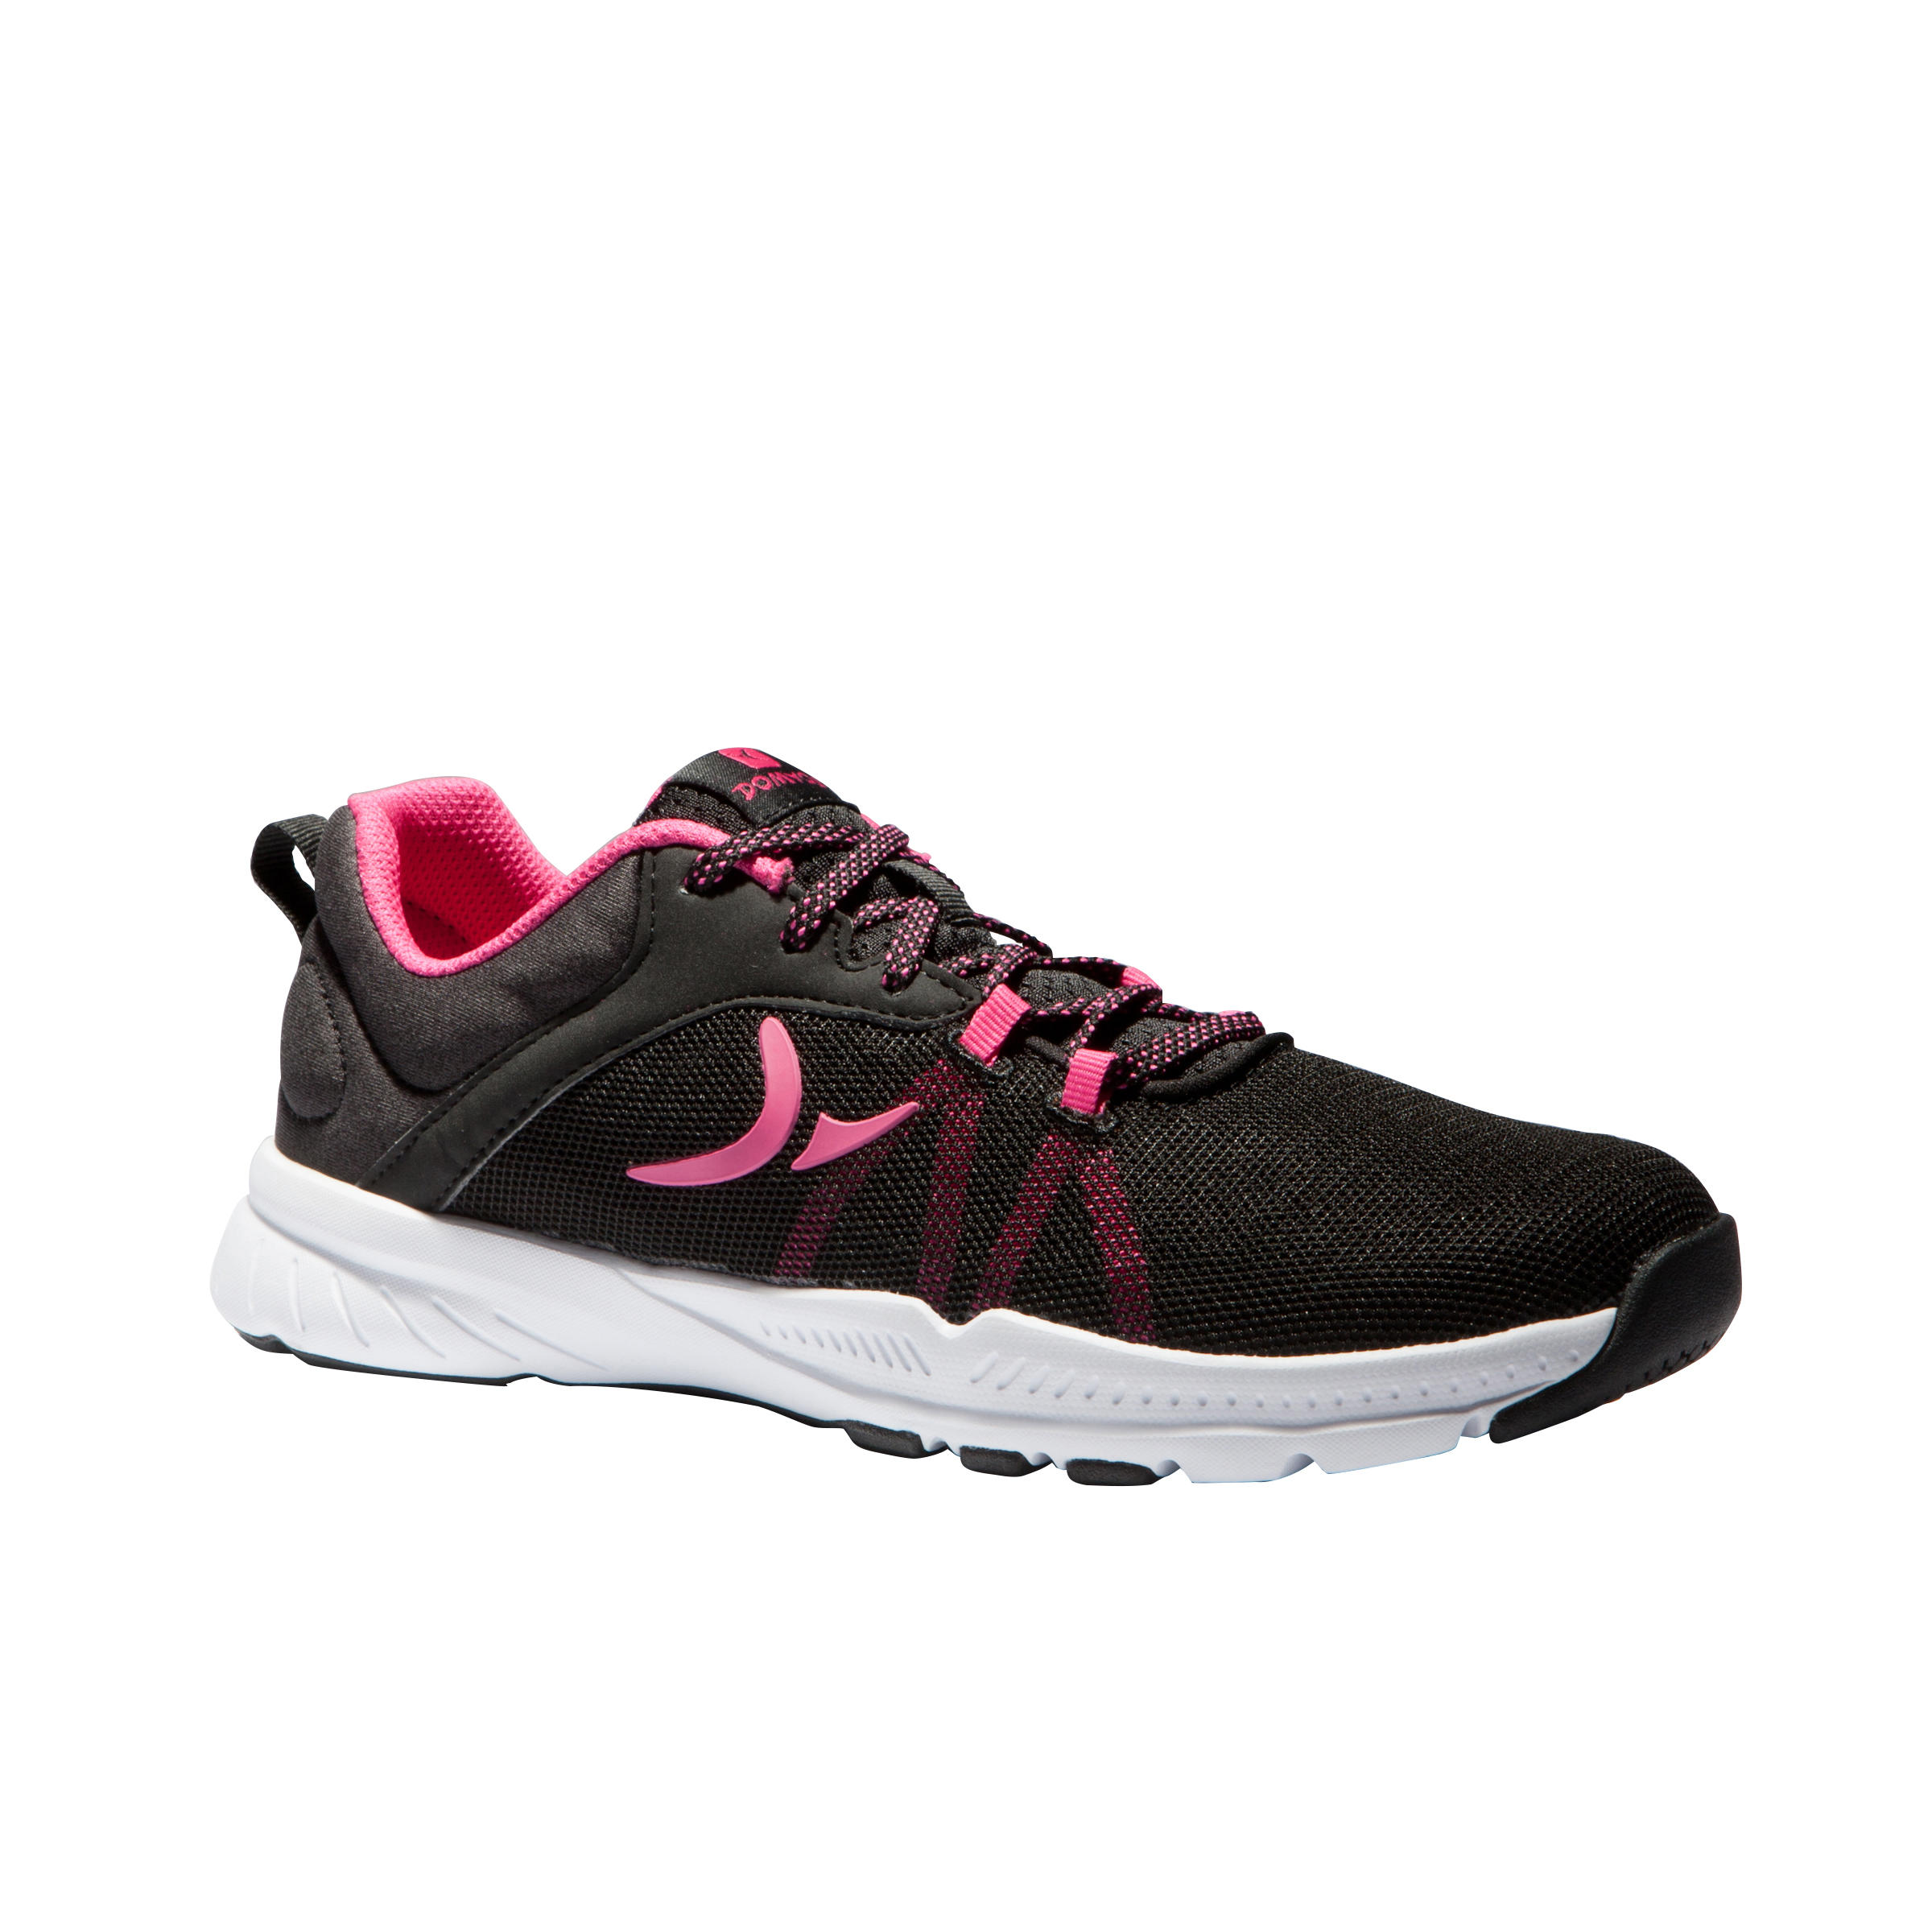 Fitness Cardio Training Shoes - Black/Pink